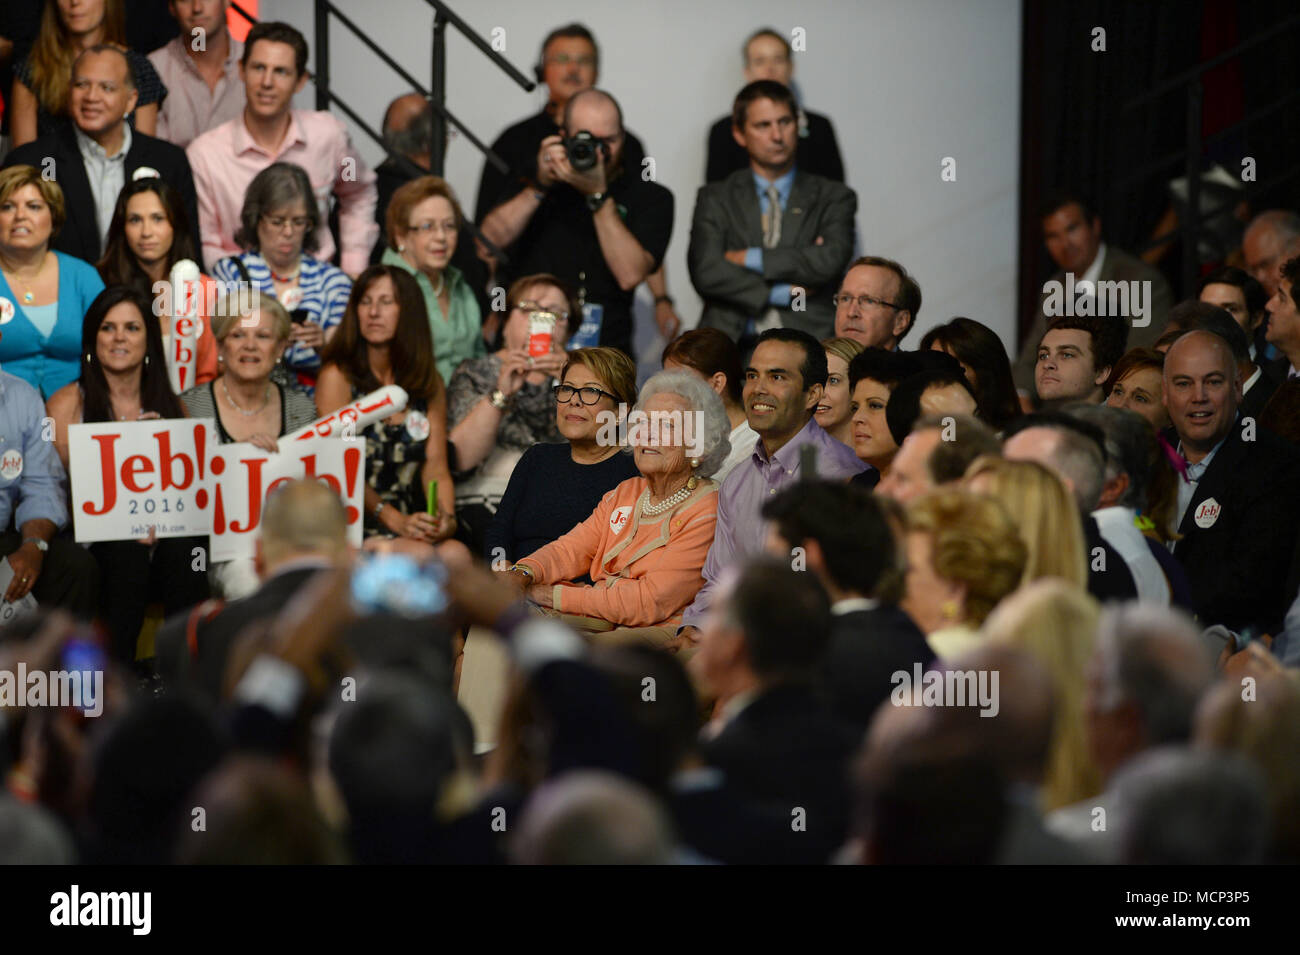 FILE: 17th Apr, 2018. Former first lady Barbara Bush 1925 - 2018. Photo taken: Miami, USA. 15th Jun, 2015. Former Florida Governor Jeb Bush on stage to announce his candidacy for the 2016 Republican presidential nomination at Miami Dade College - Kendall Campus Theodore Gibson Health Center (Gymnasium) June 15, 2015 in Miami, Florida.    People:  Barbara Bush, George P. Credit: Storms Media Group/Alamy Live News Stock Photo